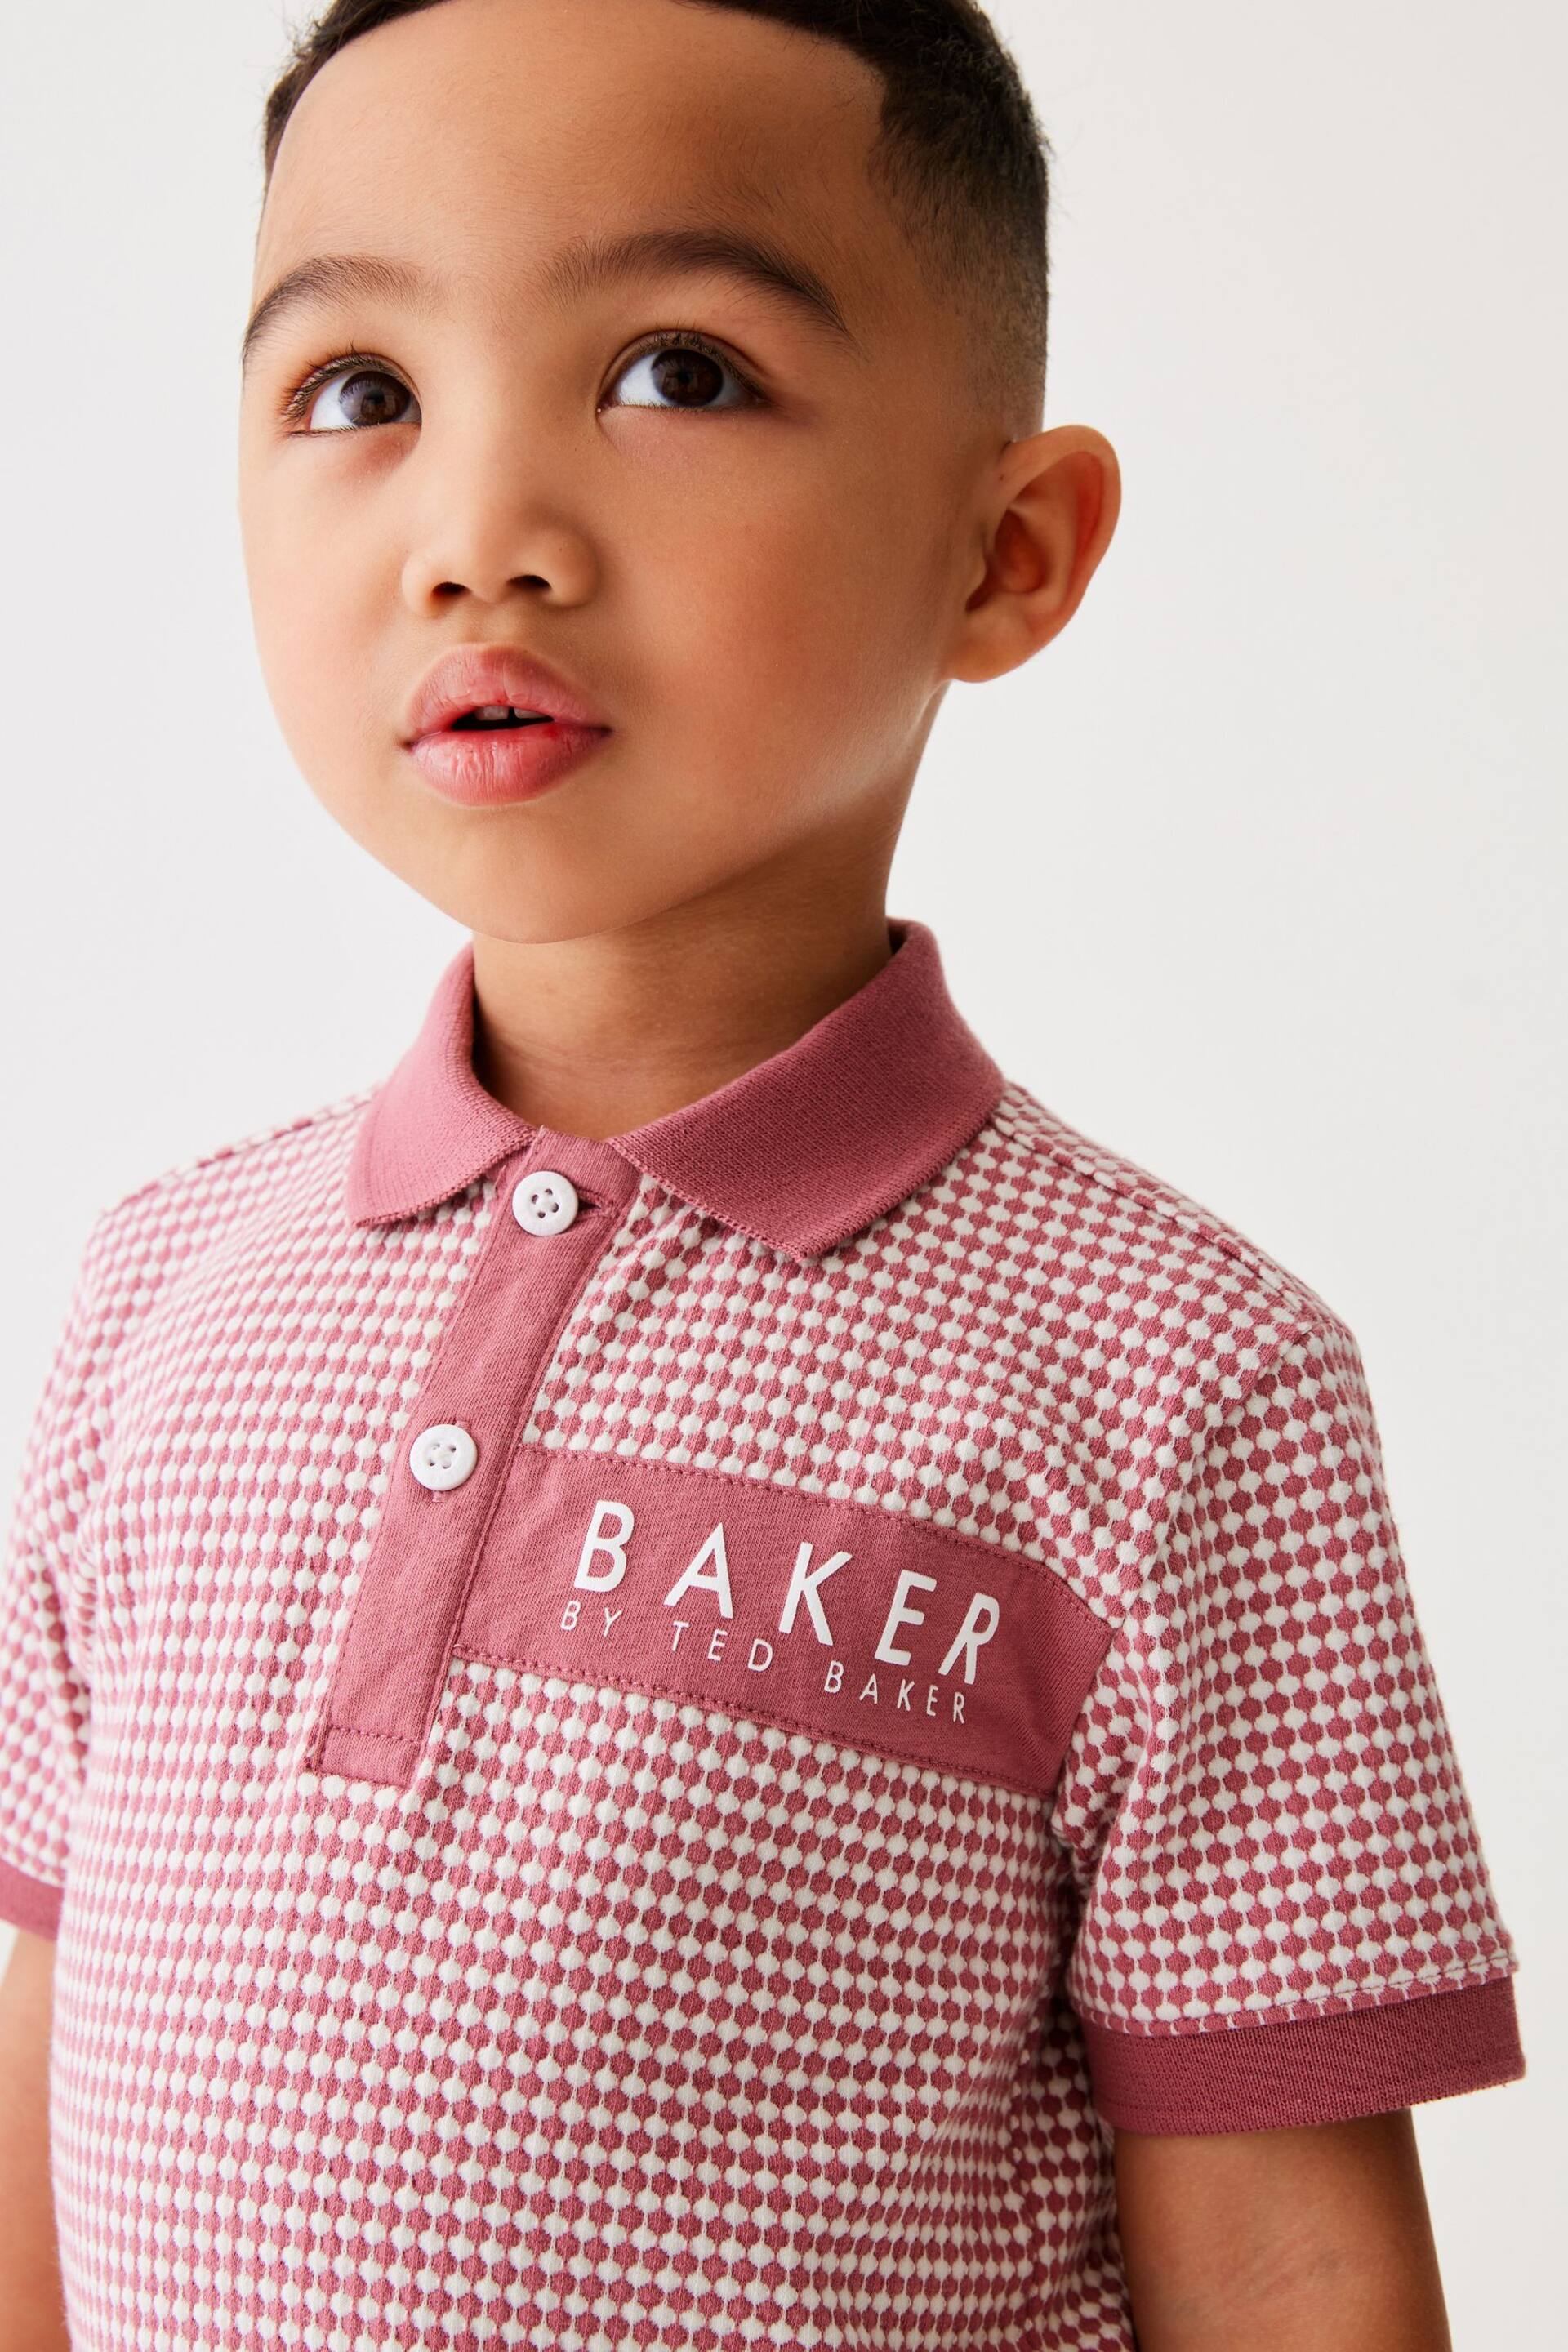 Baker by Ted Baker Textured Polo Shirt and Short Set - Image 4 of 16